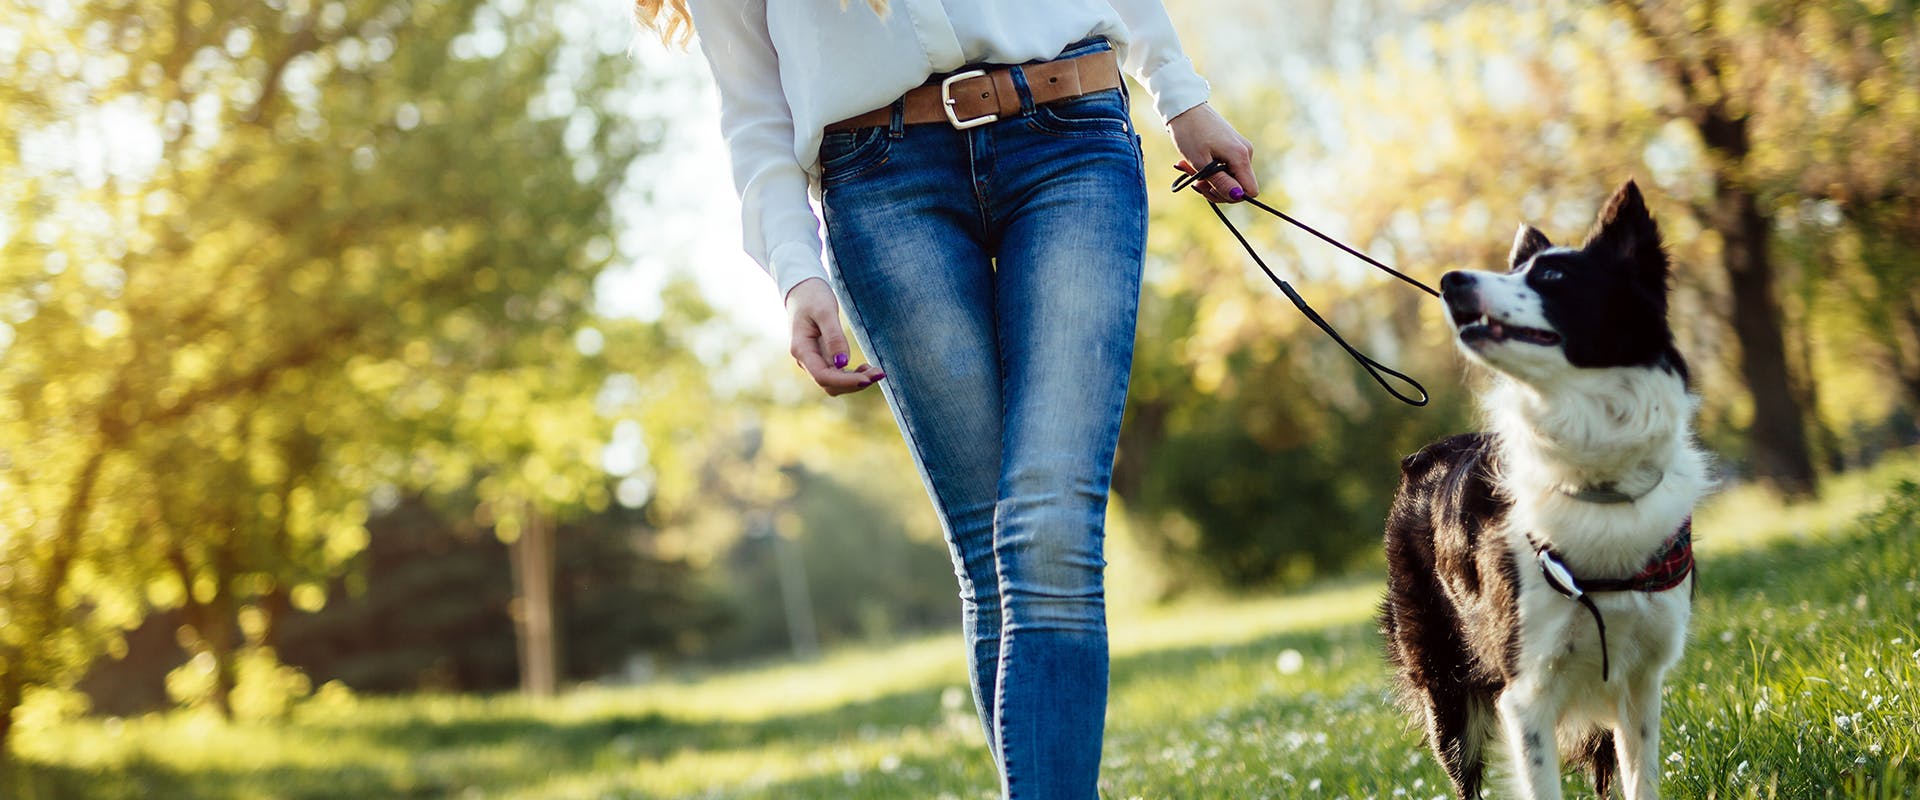 A woman walking a dog in a park on a sunny day